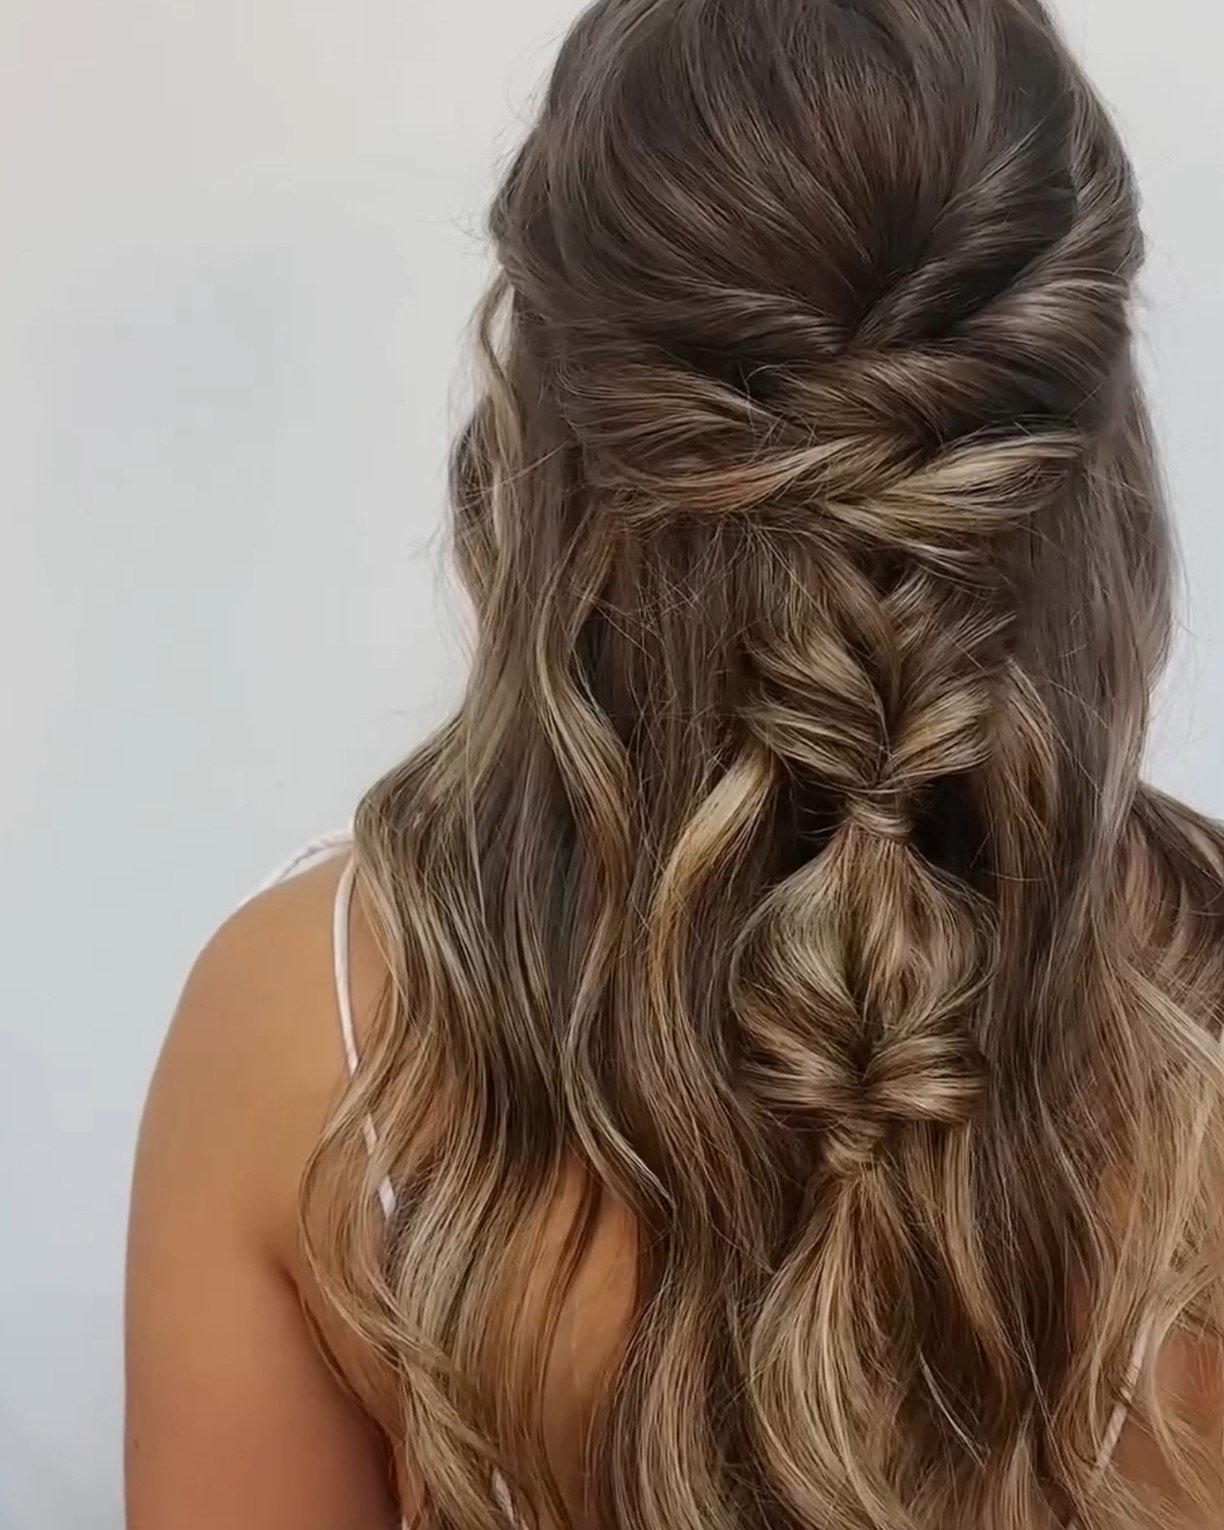 Aslan is our lil' updo guru 💫

She is obsessed with bridal styling and we're all obsessed with he looks she creates You can follow her @hairbyaslan 

If you want to absolutely love your wedding hair and give your bridesmaids elegant + effortless sty